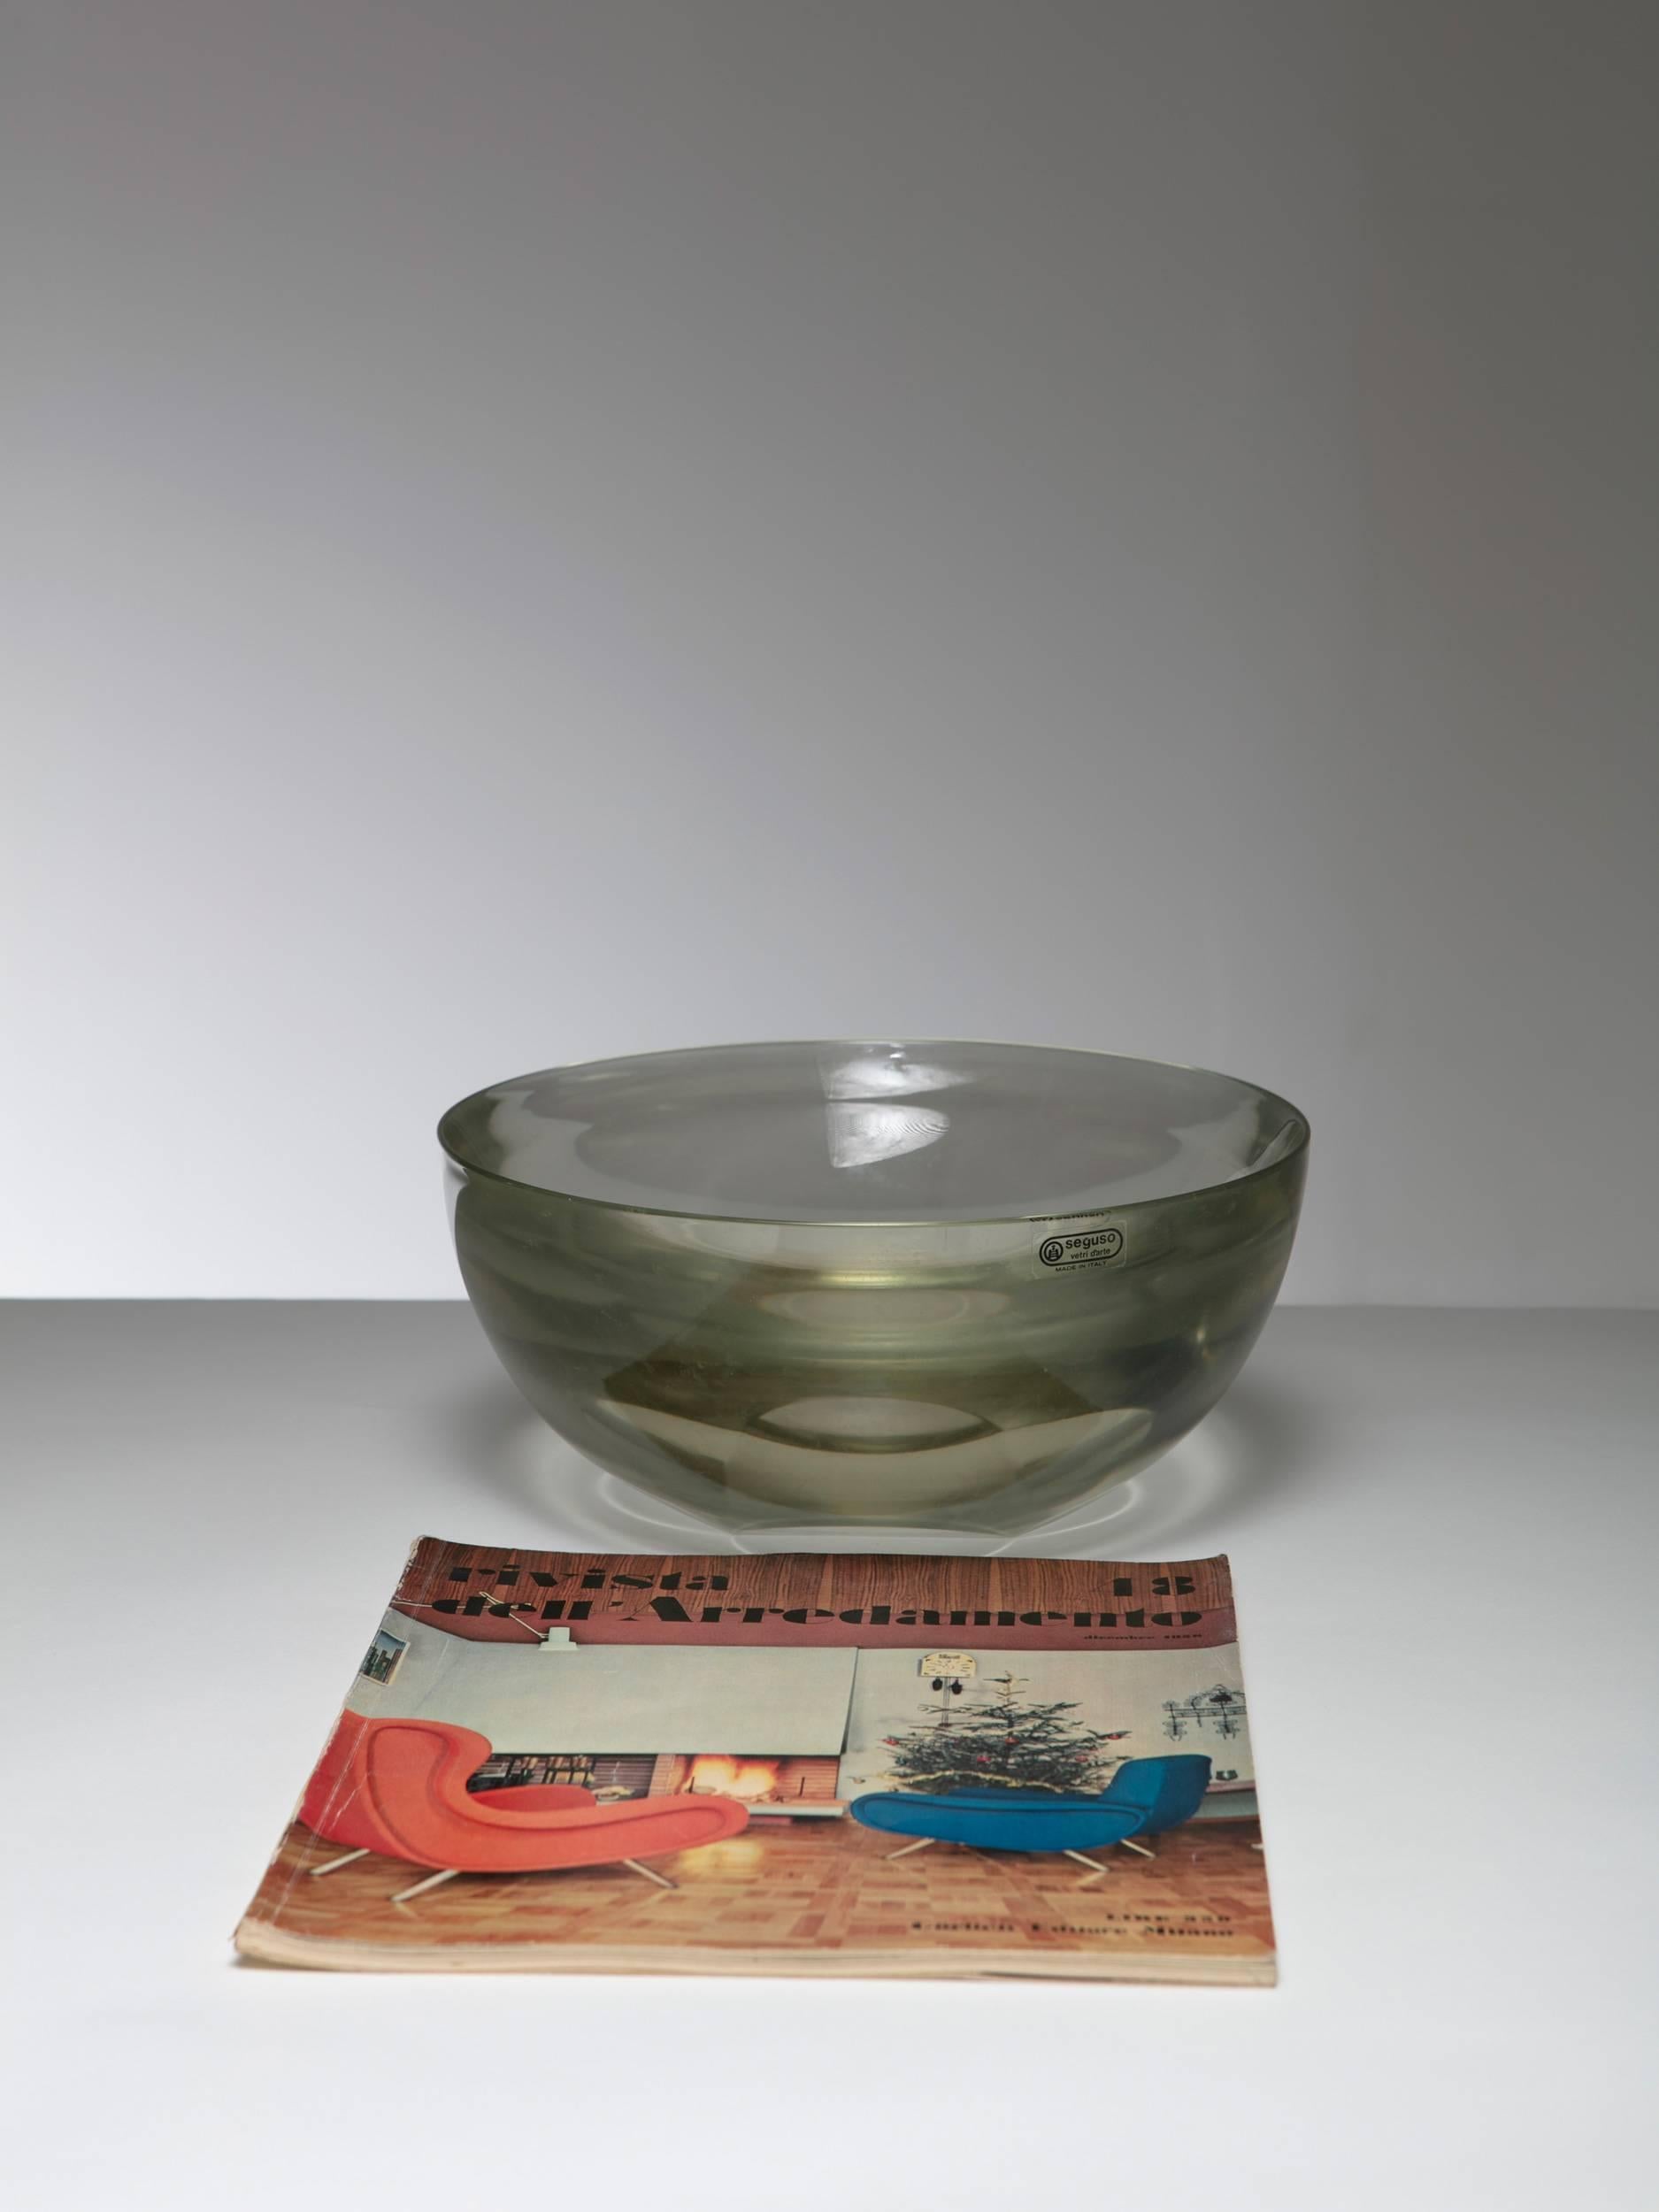 Large Murano glass bowl by Seguso.
Solid glass translucent lens.